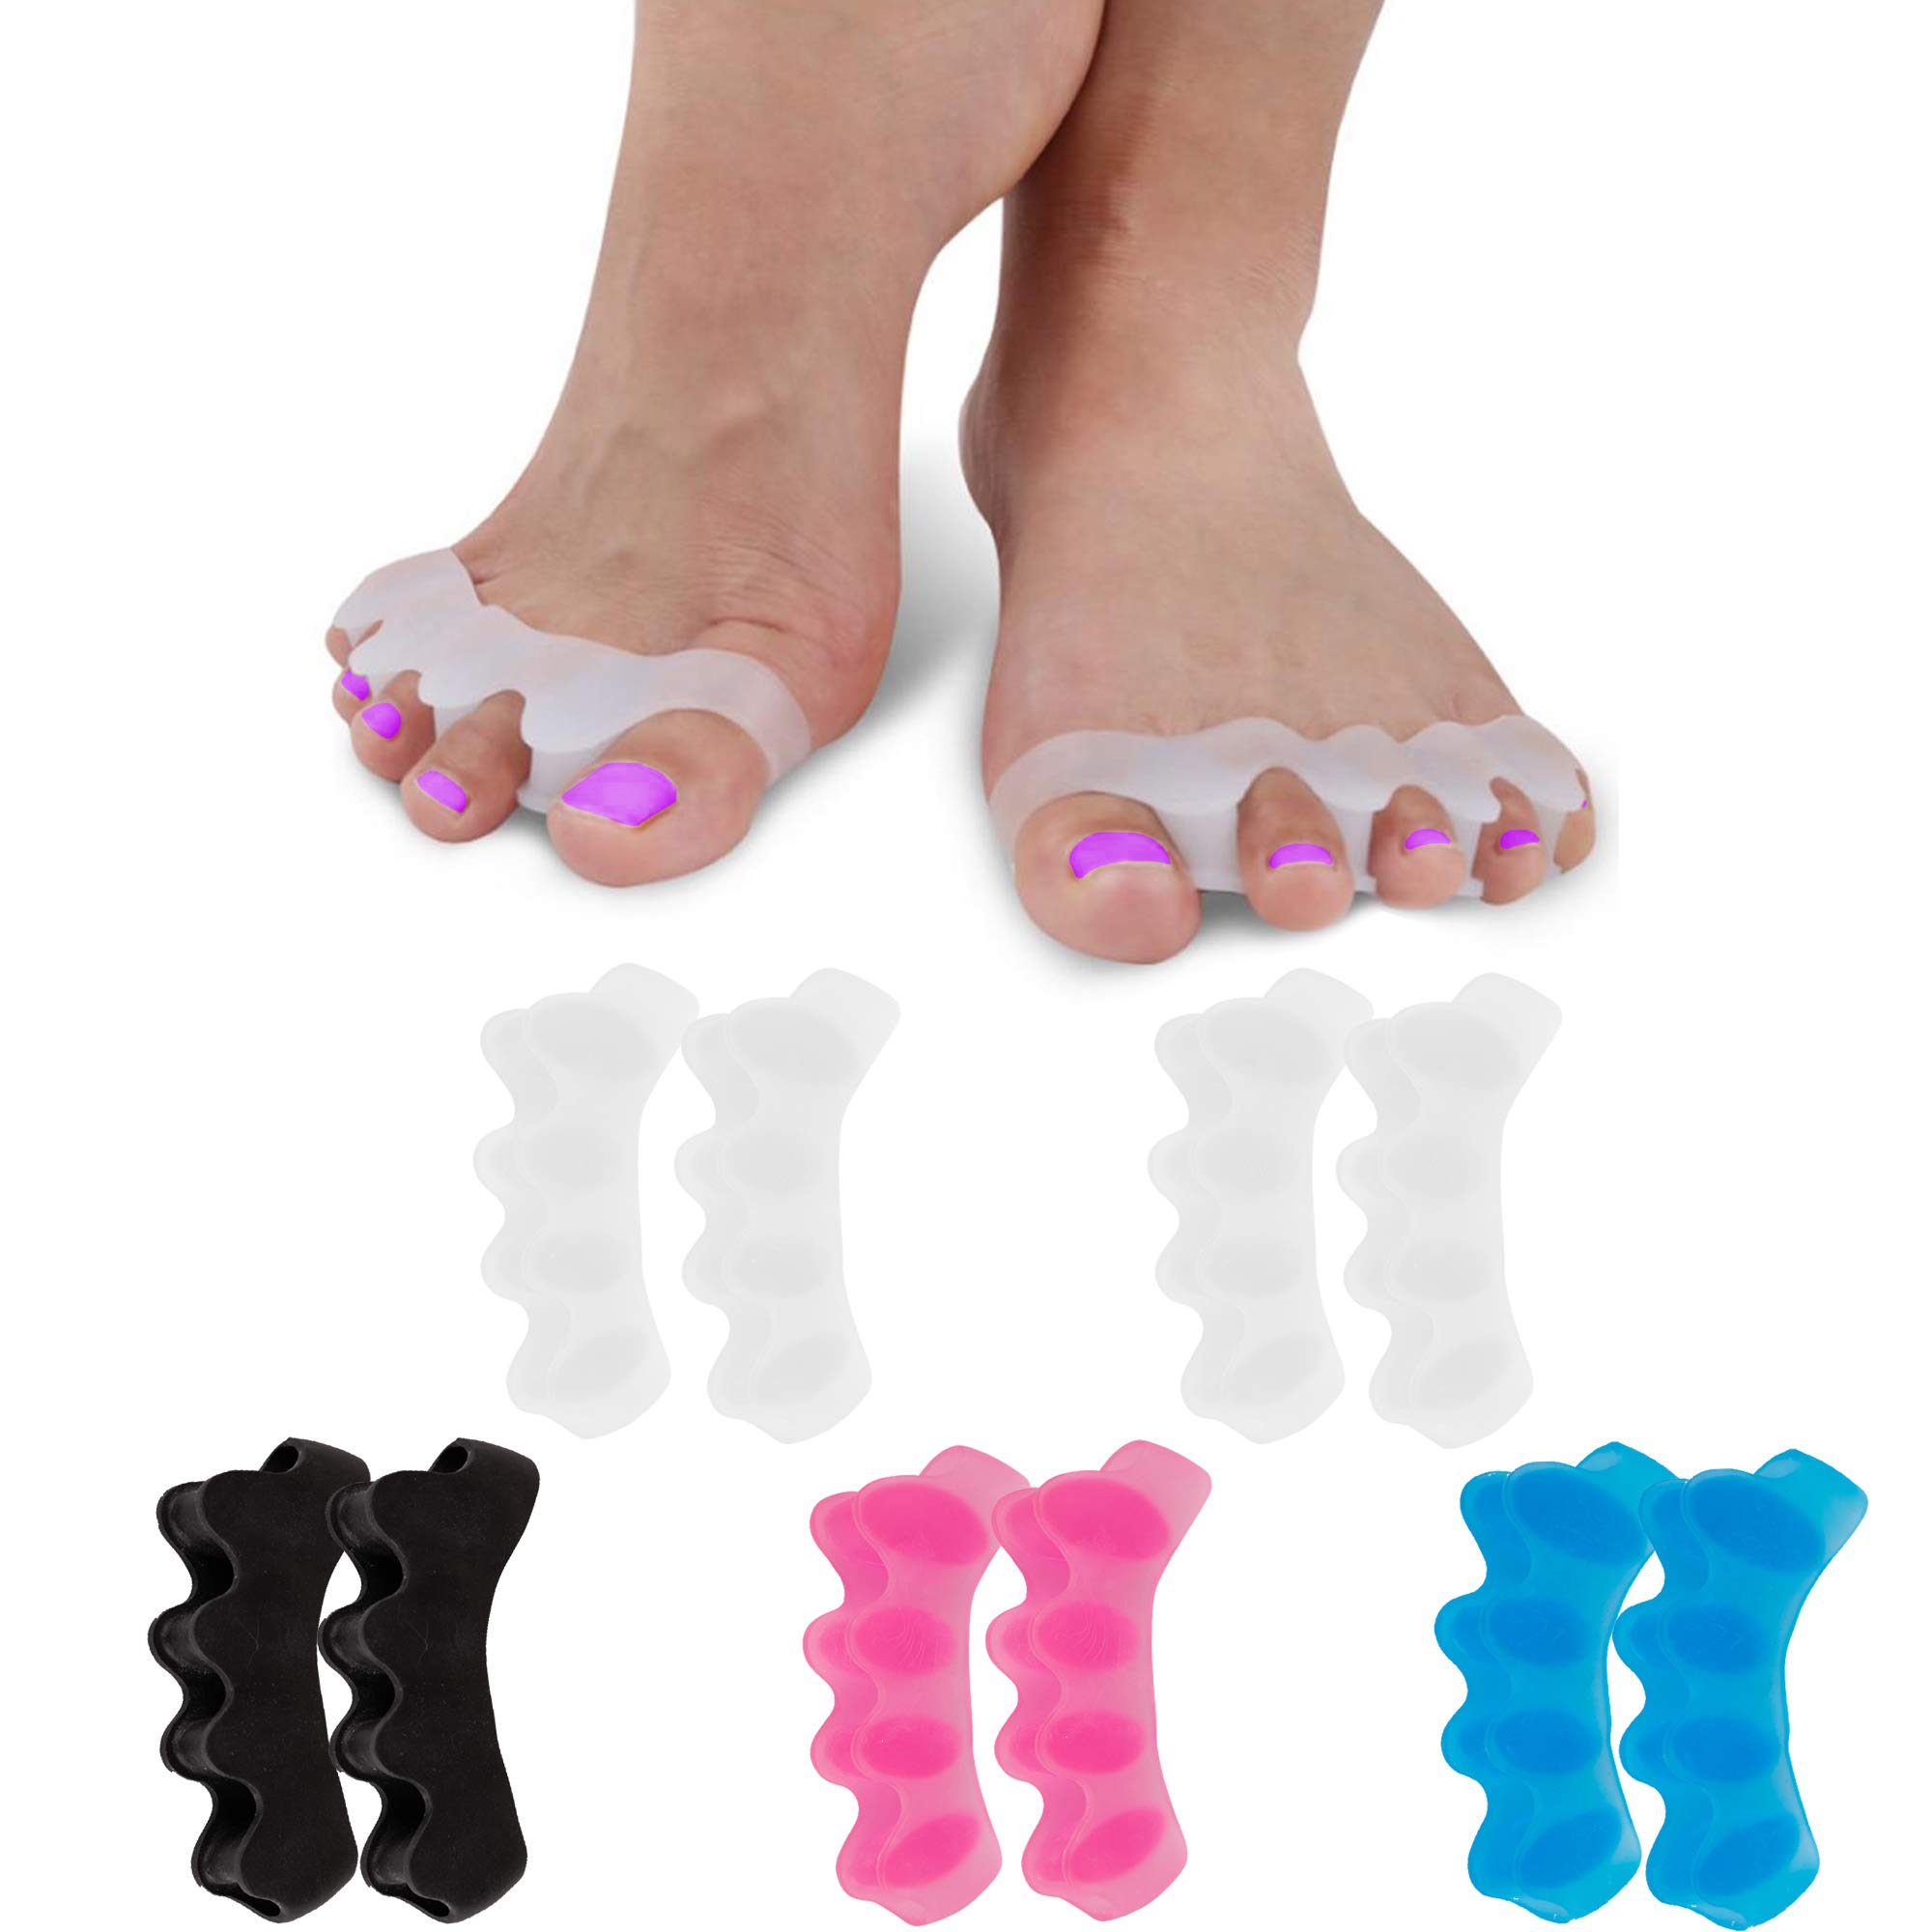 5 Pair) Toe Separators, Spacers, Straightener, Stretcher, Spreader, Yoga  for Overlapping Toes and Restore Crooked Toes